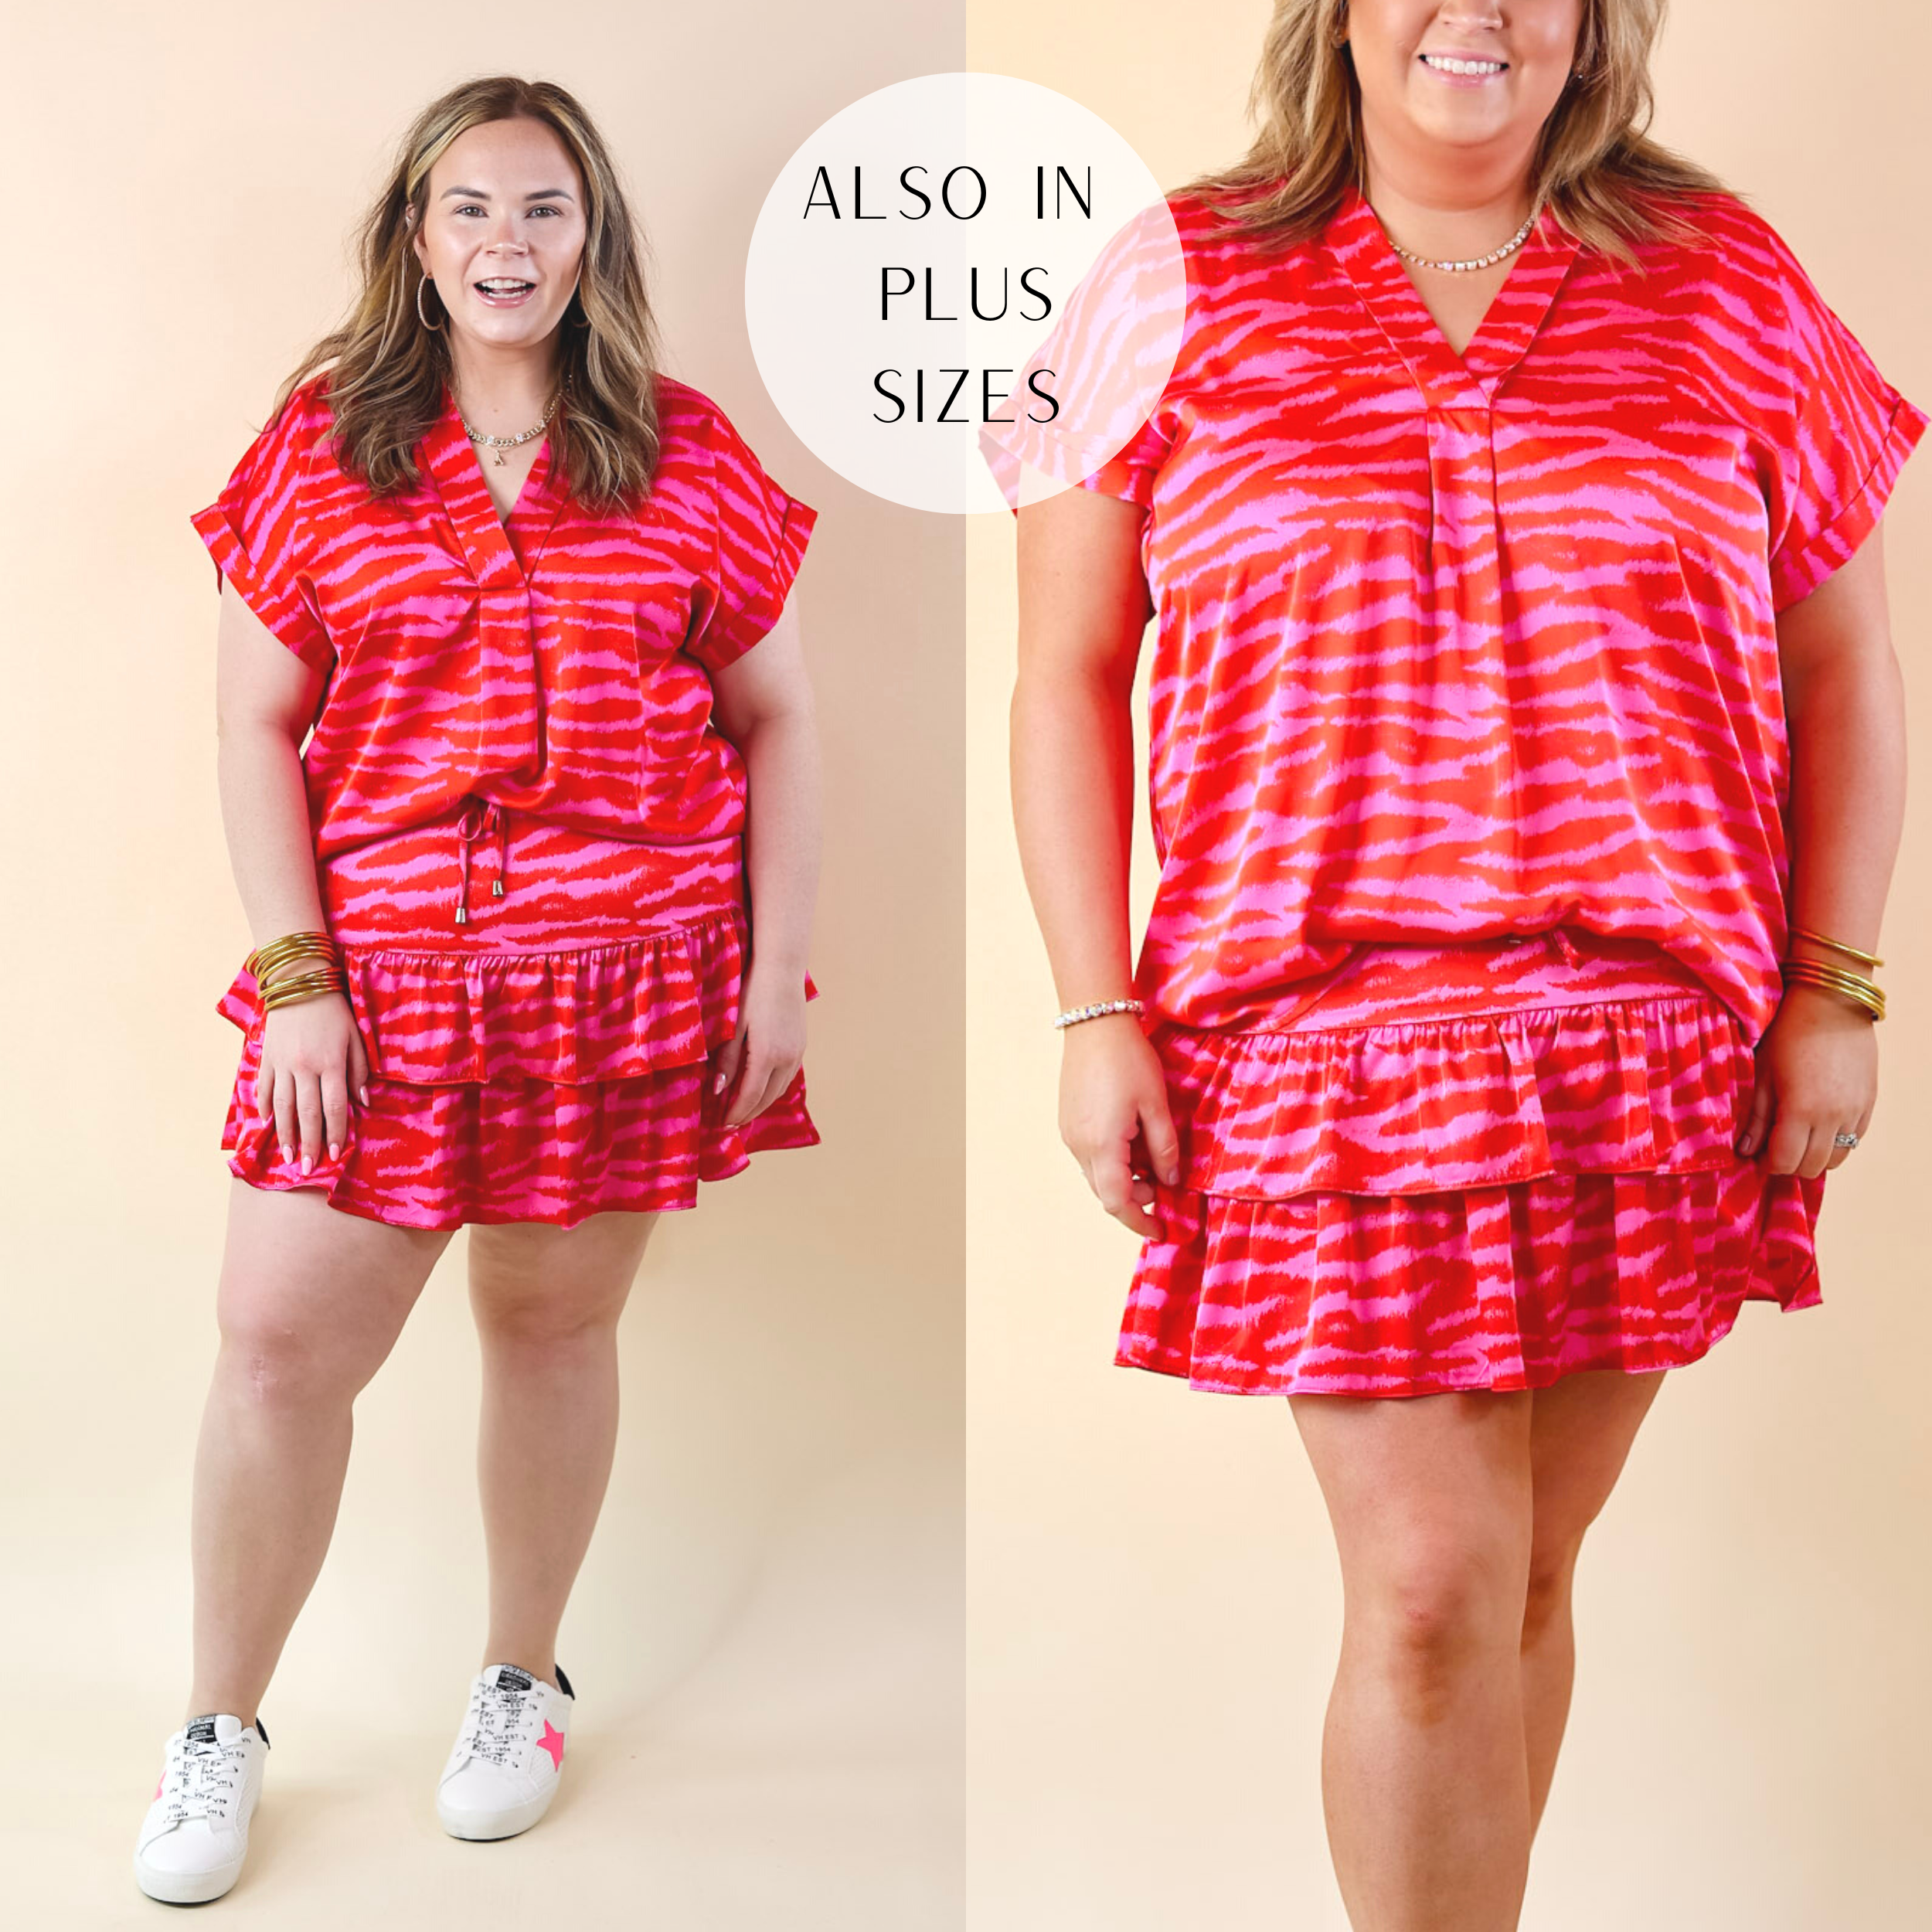 Vibrant Vibes Zebra Print Tiered Skort with Drawstring Waist in Red and Pink - Giddy Up Glamour Boutique